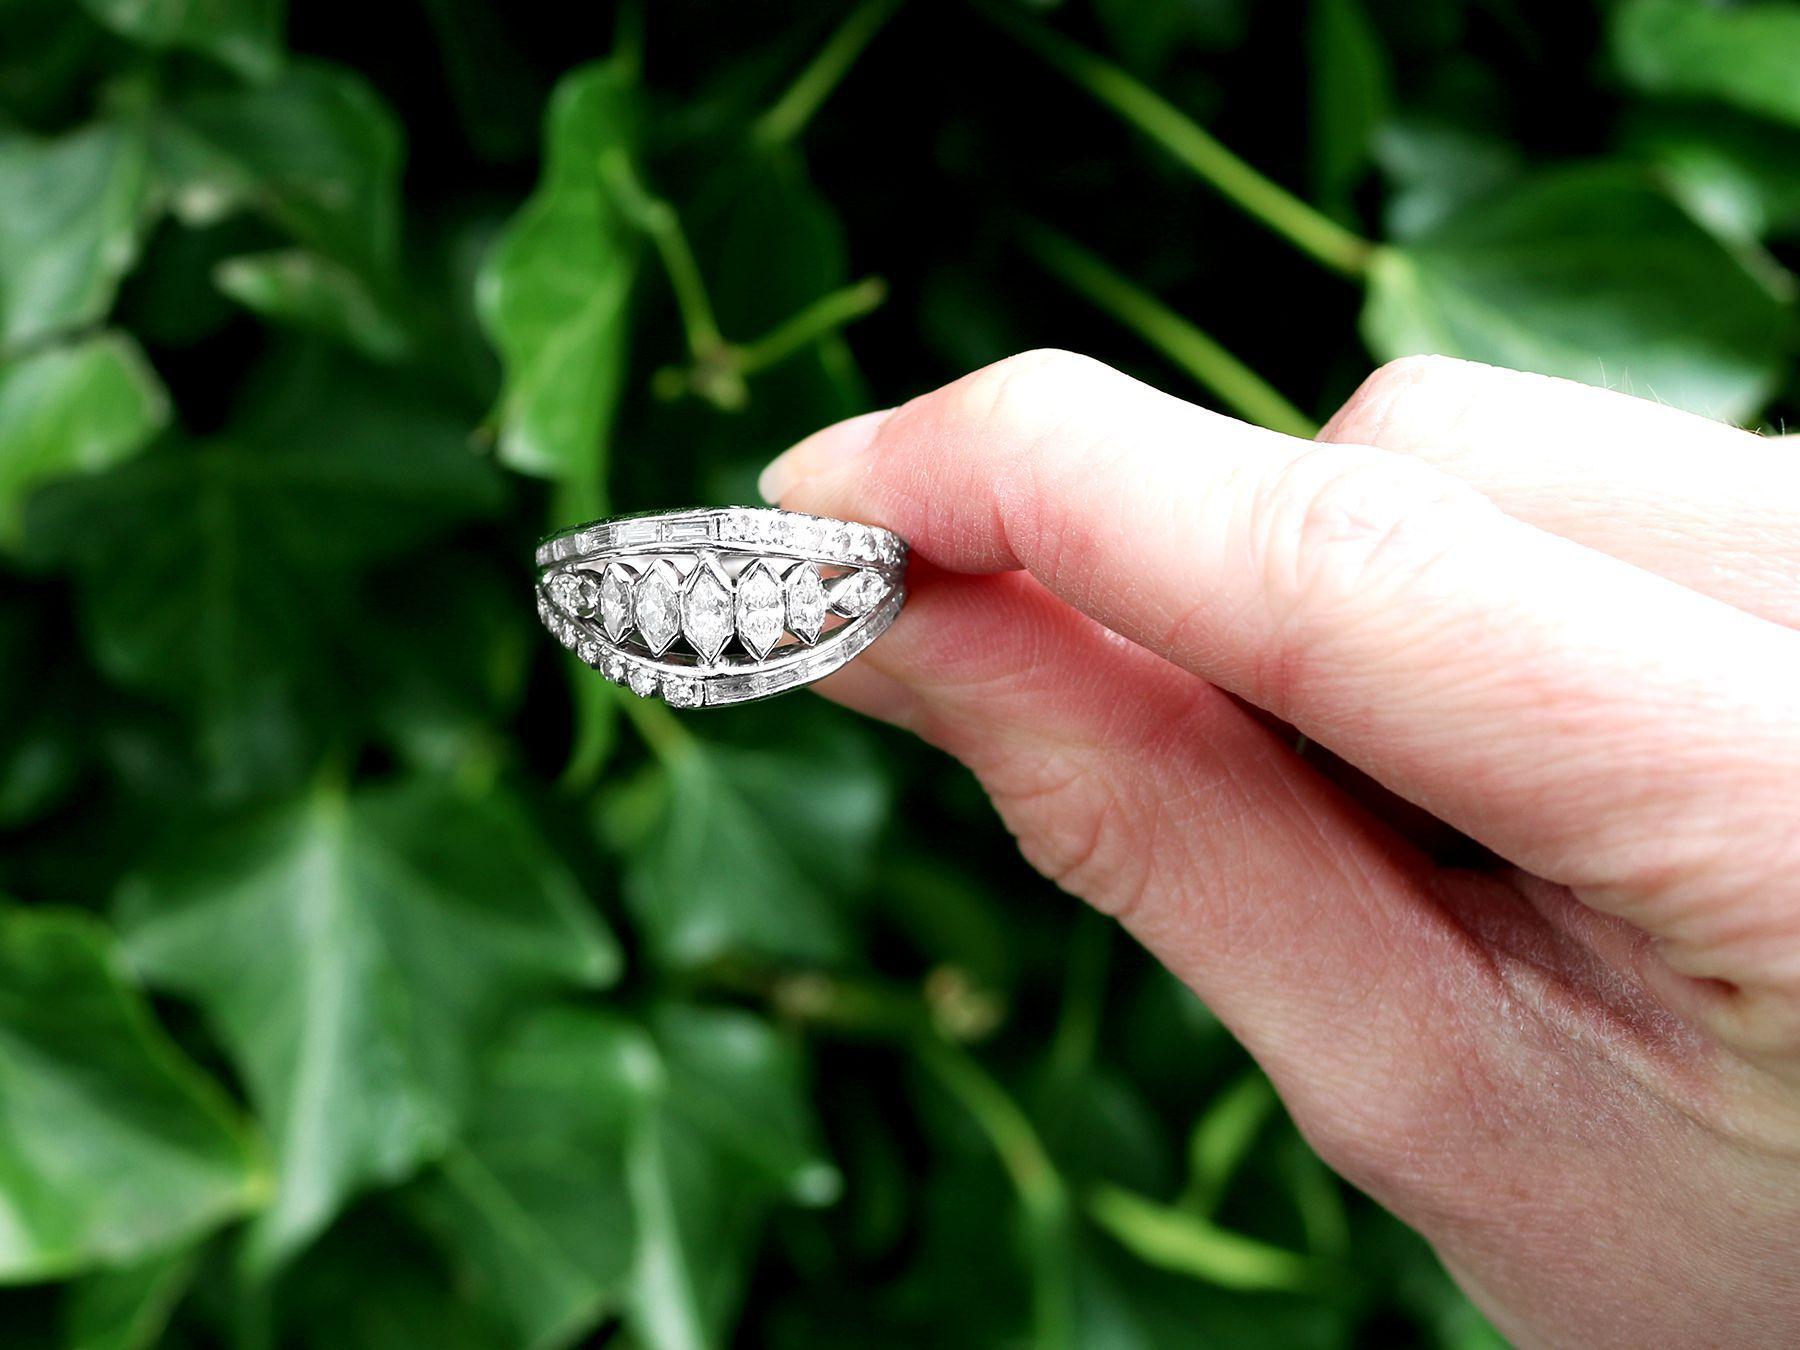 A stunning, fine and impressive antique 2.38 carat diamond and platinum dress ring; part of our diverse diamond jewelry and estate jewelry collections

This stunning, fine and impressive 1930s diamond ring has been crafted in platinum.

The